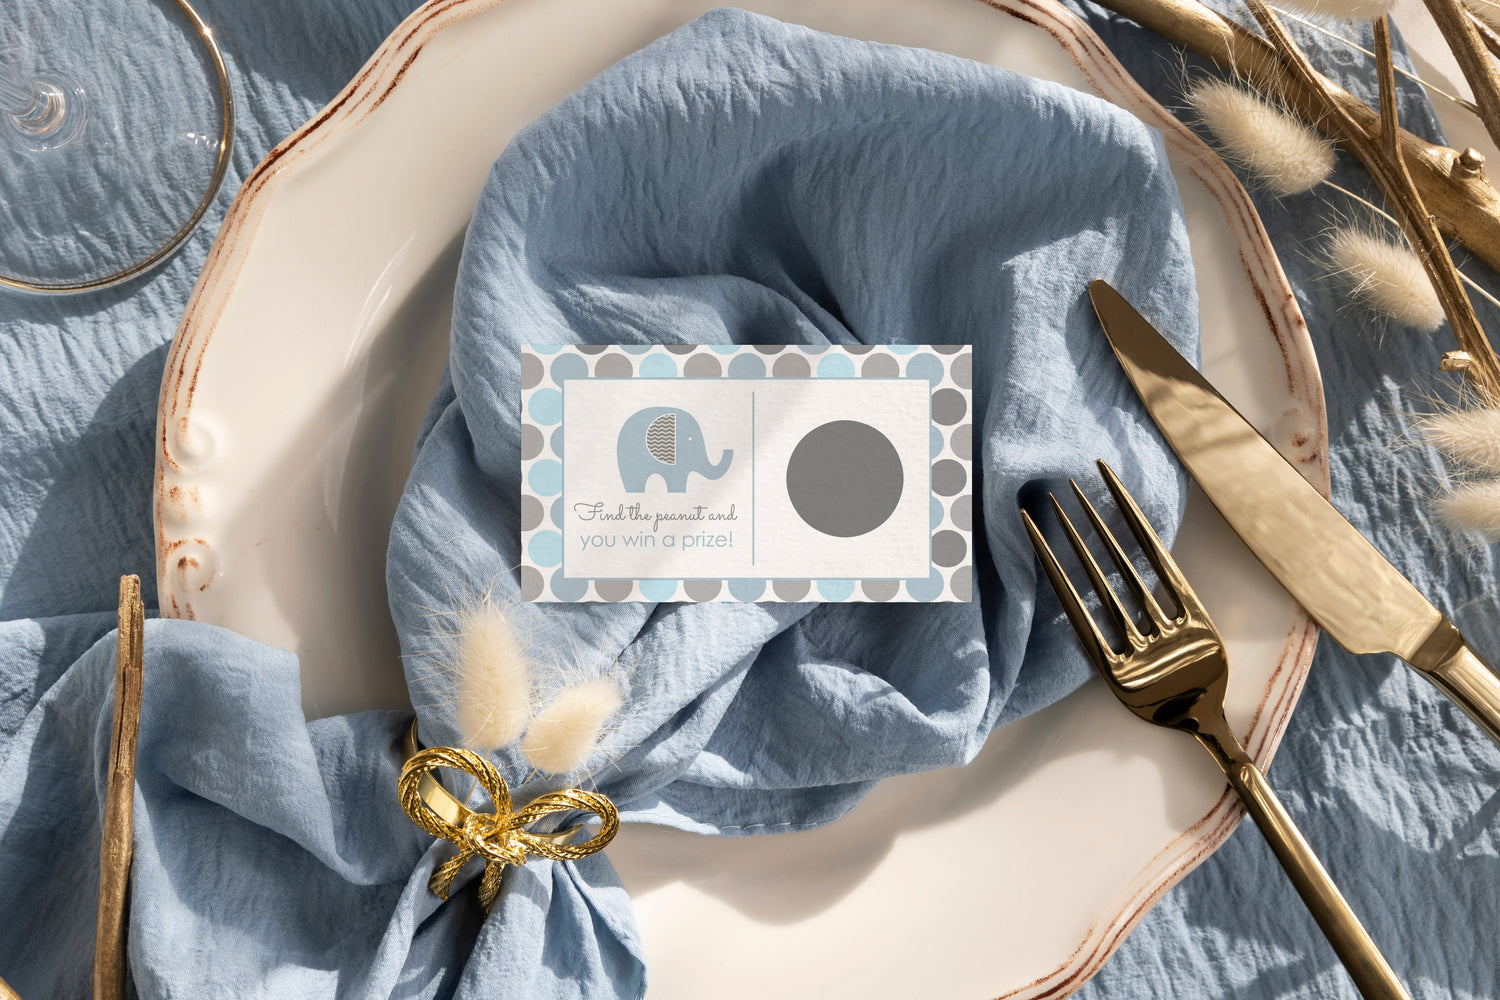 Plan a delightful baby shower with our&nbsp;Cute Blue Elephant Theme Party Supplies. From eco-friendly decorations to adorable tableware, our collection adds a touch of elegance and joy to your special day.